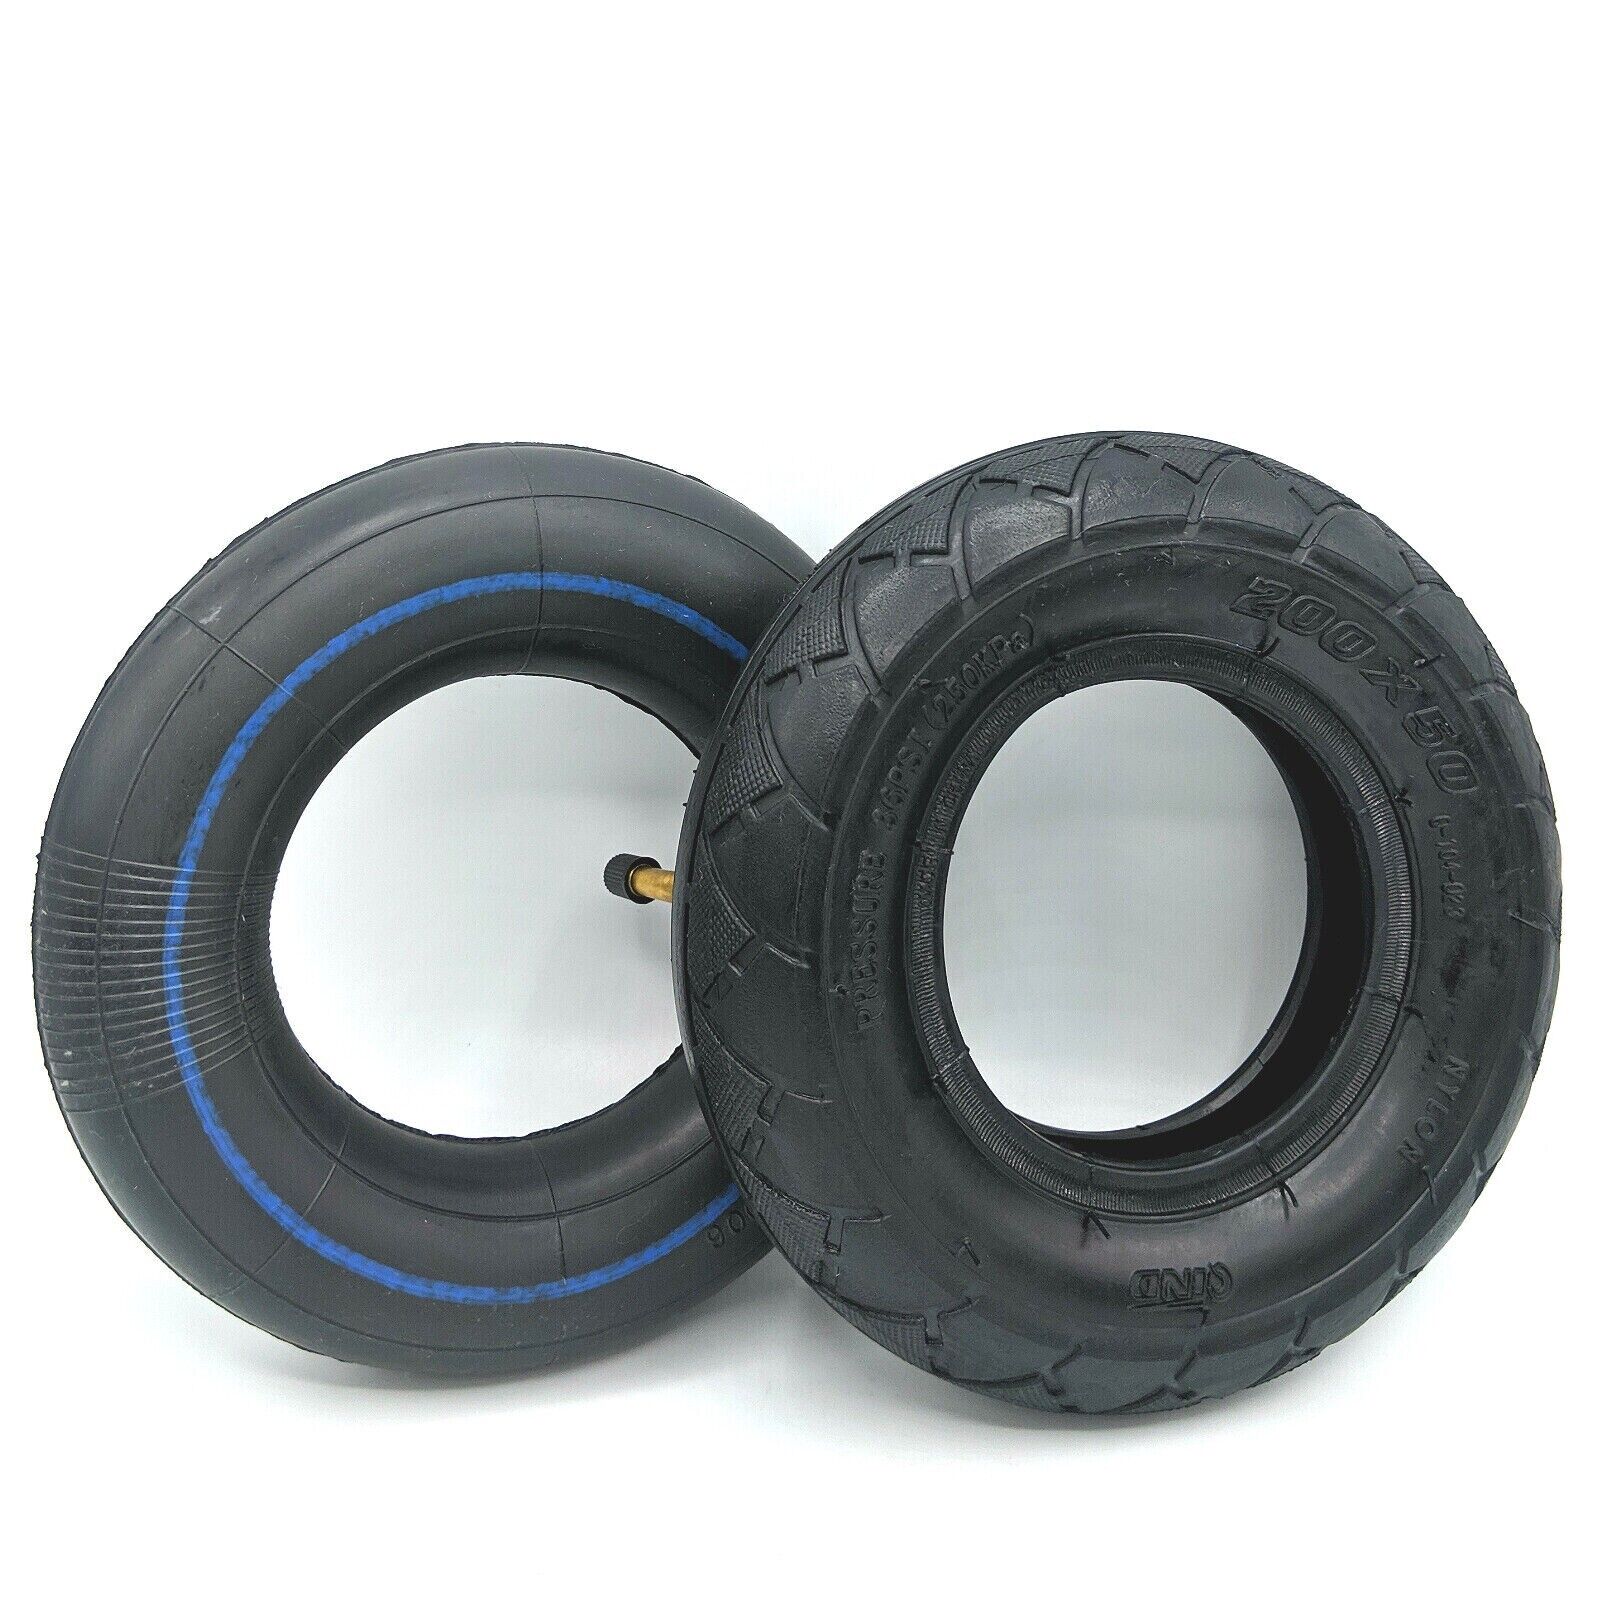 200x50 Razor Tire and Inner Tube for Go Cart Scooter